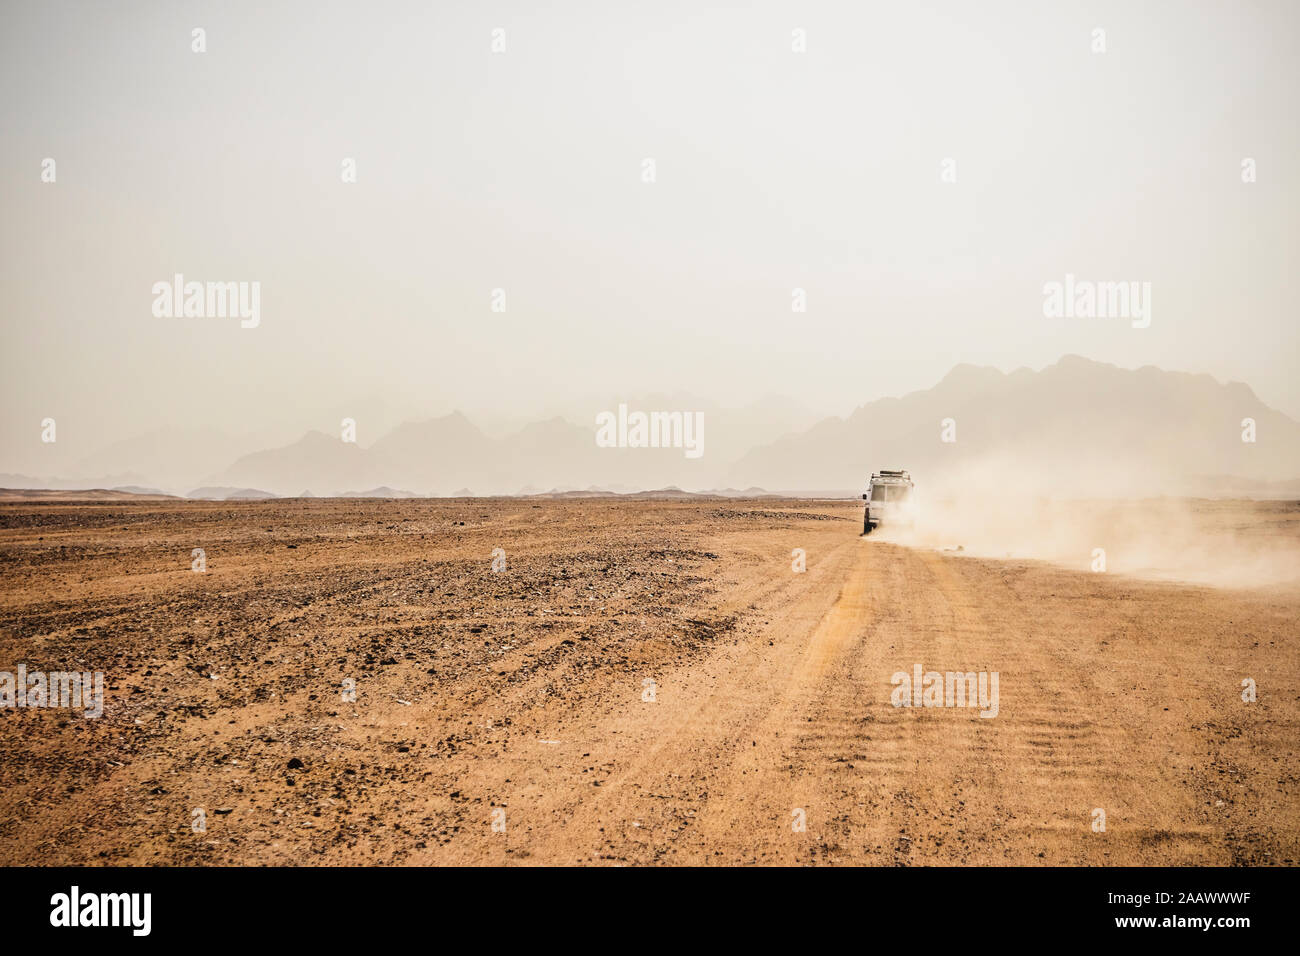 Off-road vehicle moving on arid landscape against clear sky, Suez, Egypt Stock Photo